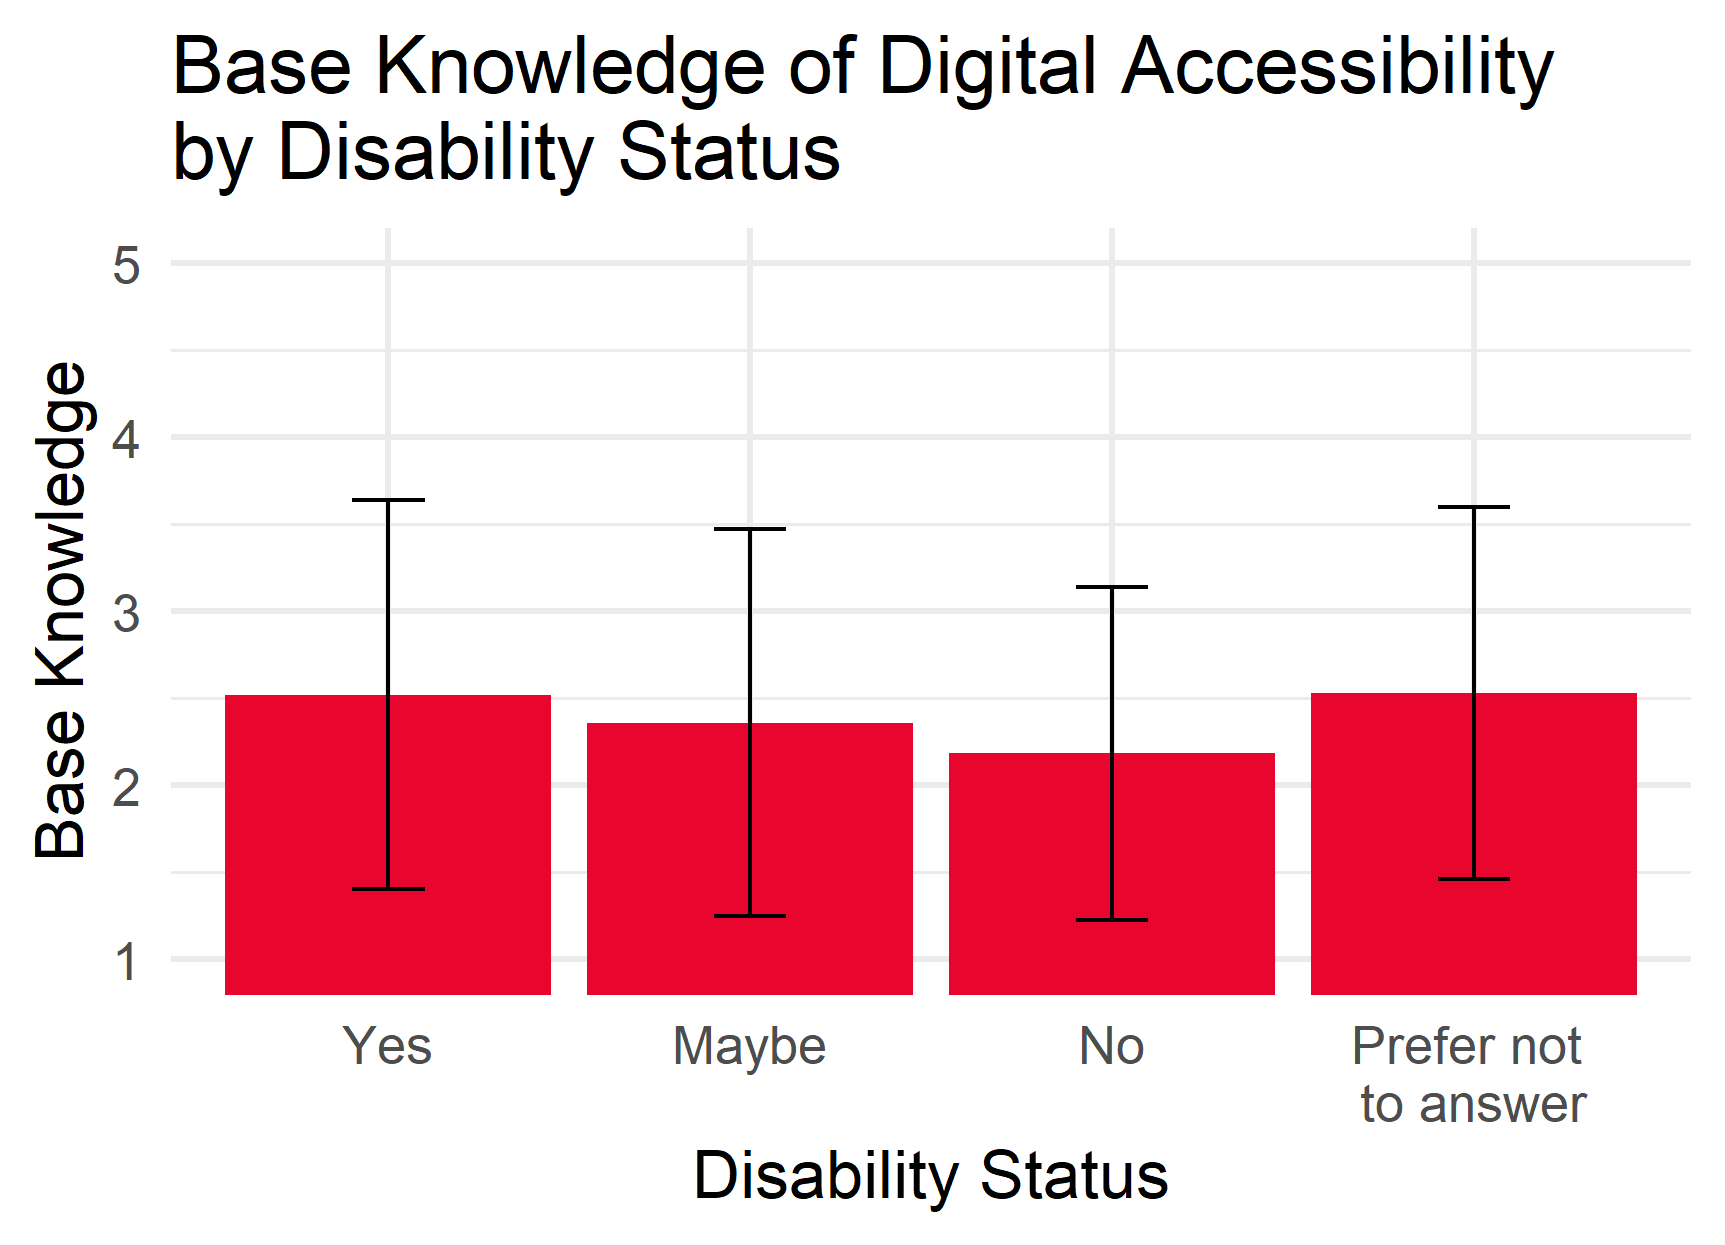 A barplot with error bars Base Knowledge of Digital Accessibility by Disability Status. No significance, but people identifying as having a disability (M = 2.5; CI = 1.4, 3.6) are roughly tied with those who prefer not to answer (M = 2.5; CI = 1.5, 3.6). Those who answer 